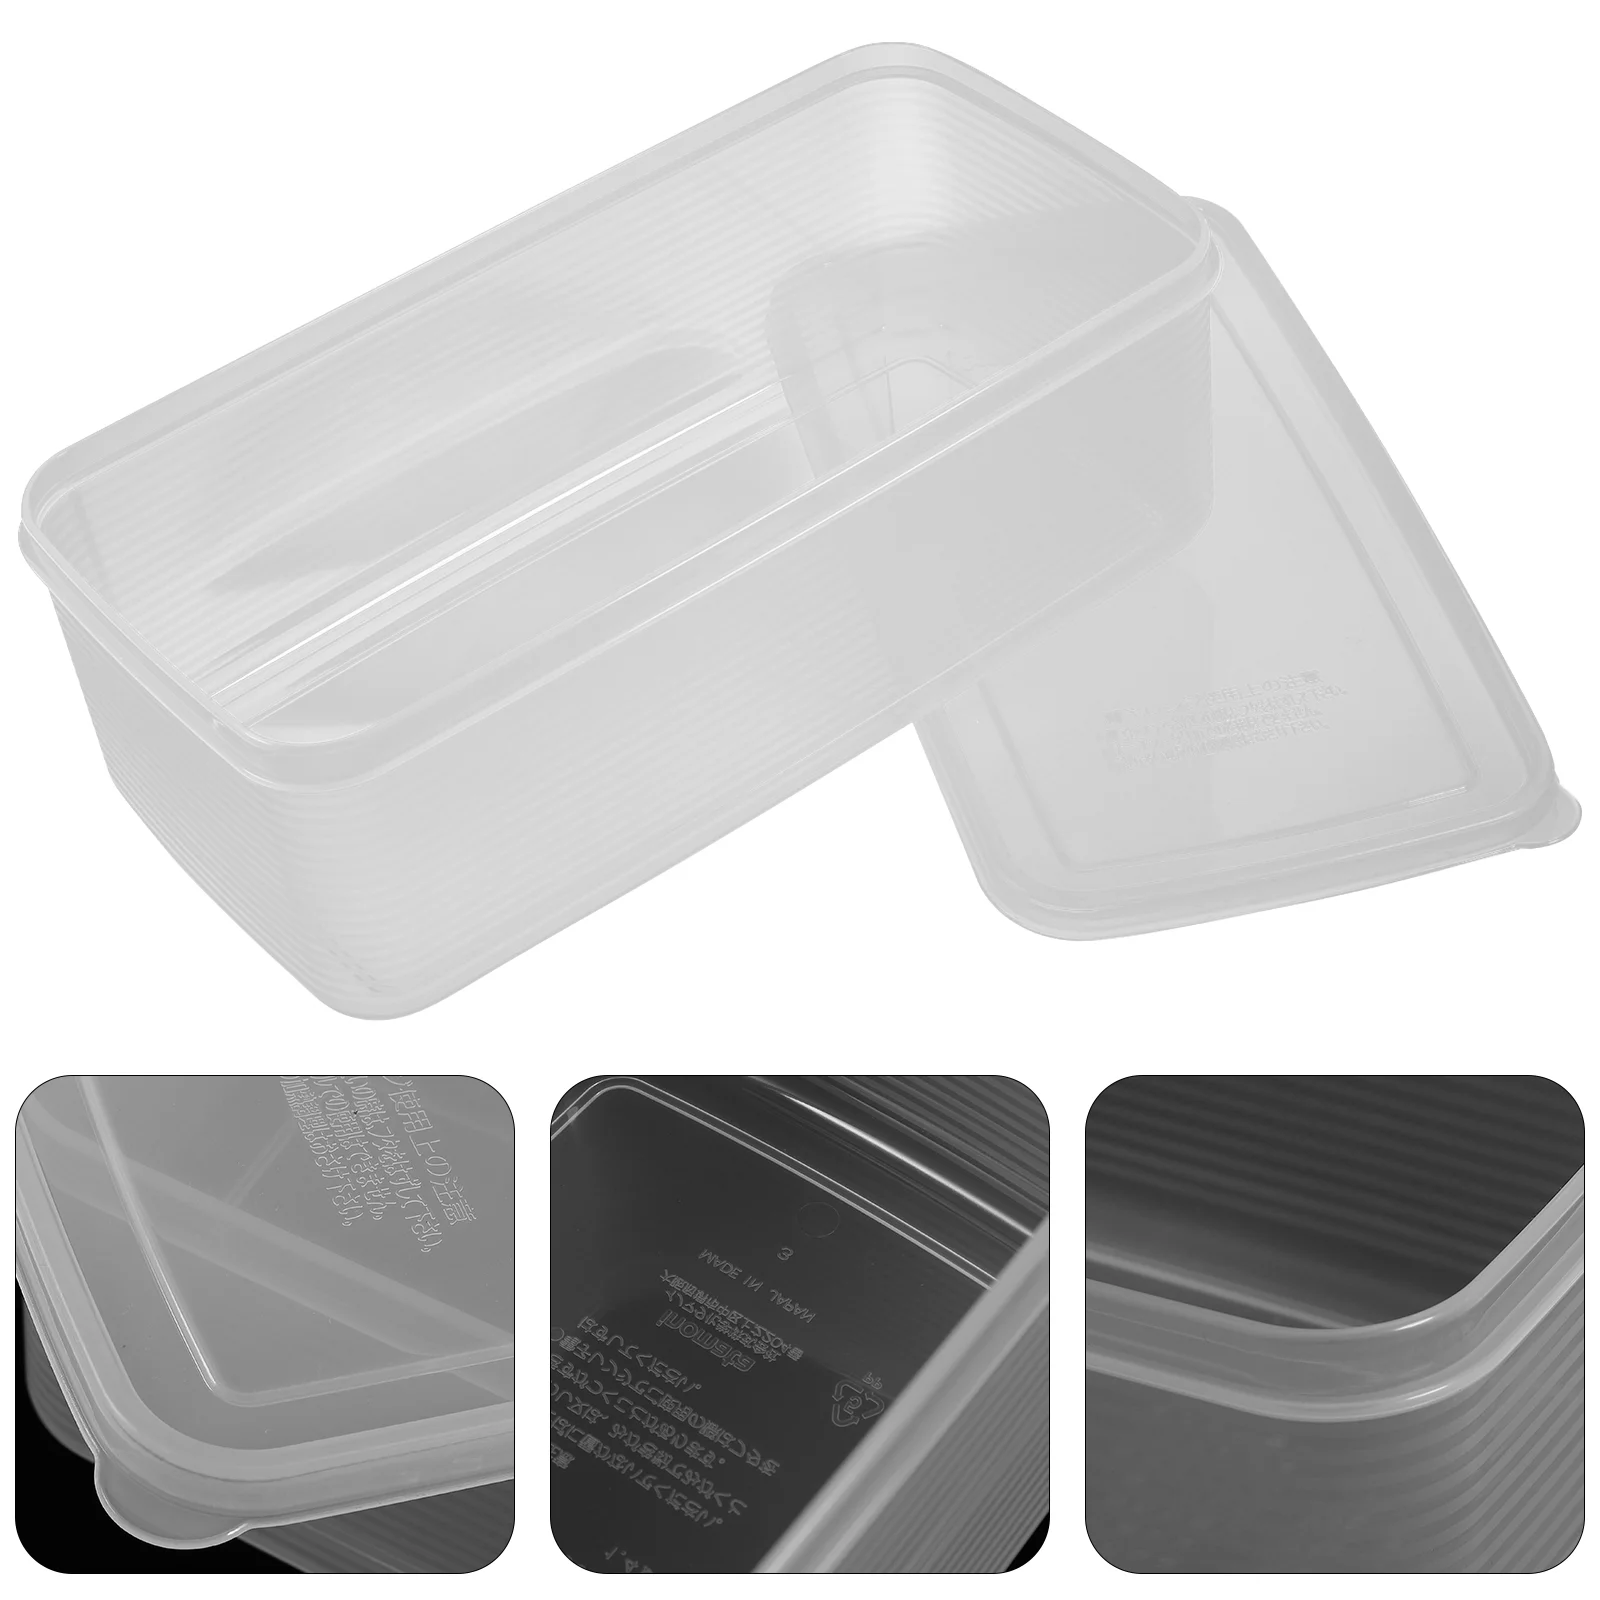 

Bread Storage Box Holder Kitchen Counter Loaf Container Containers Sealed Organizer Pantry Keeper Airtight Pp Food